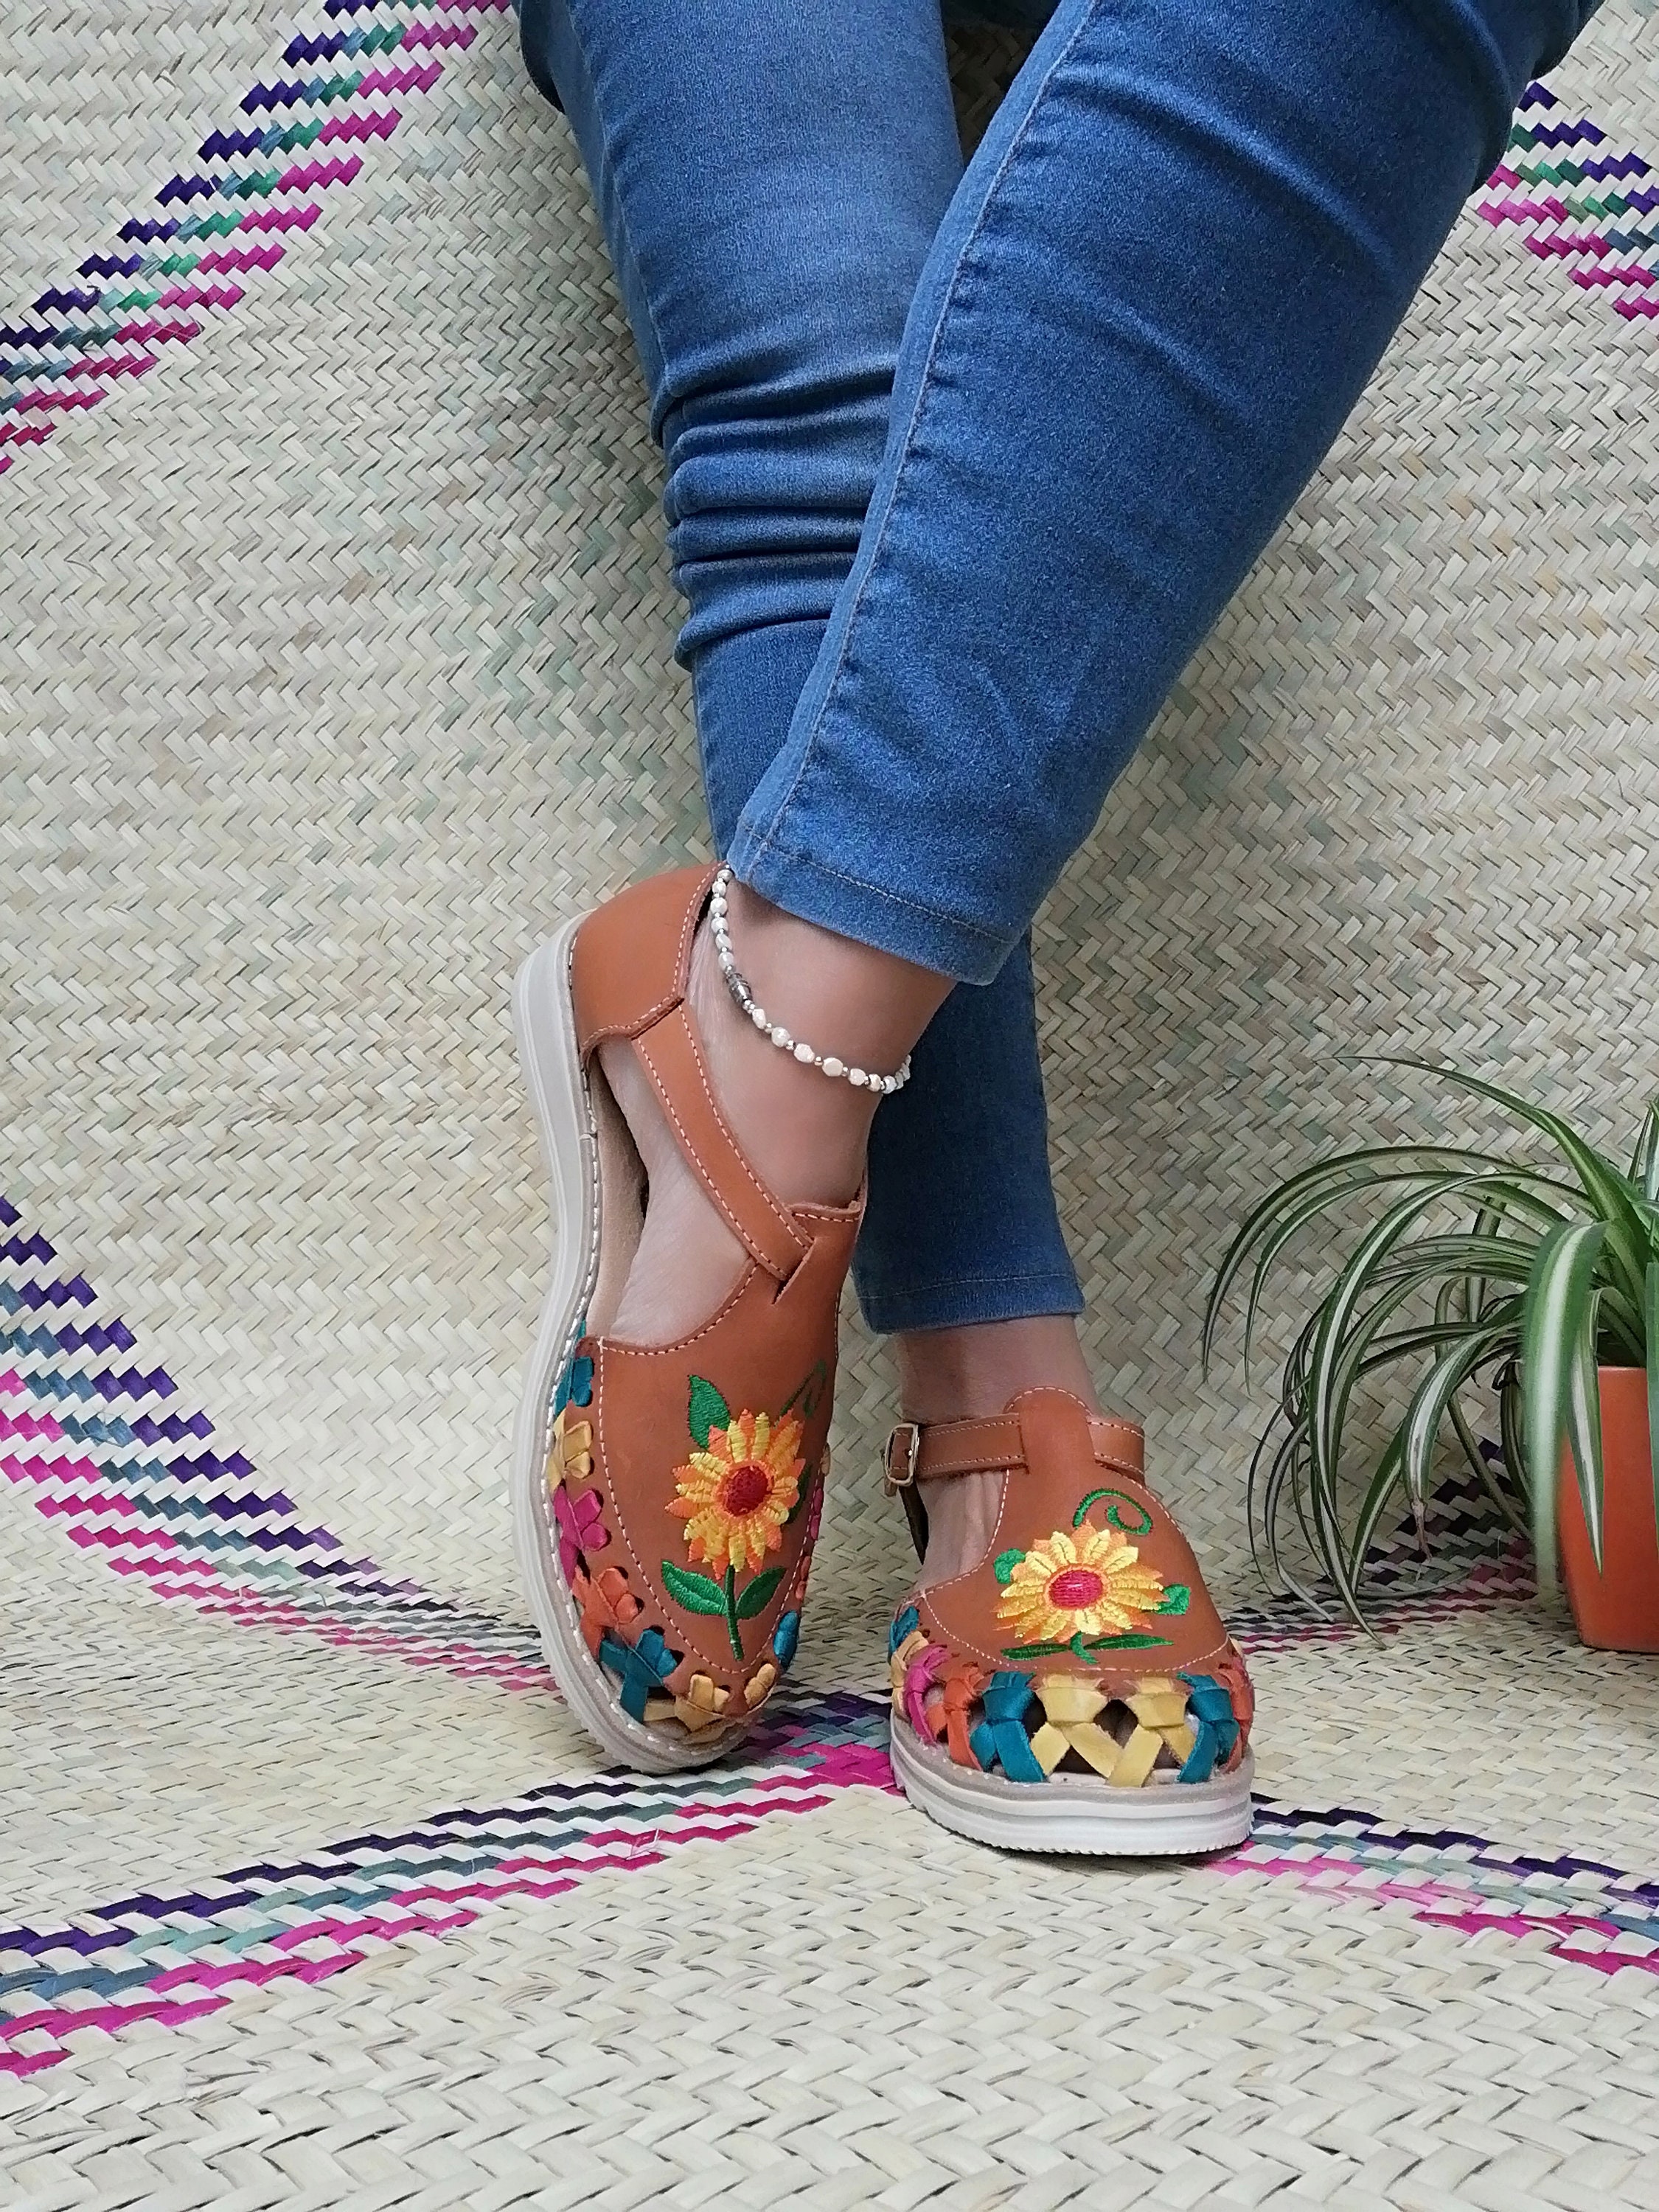 Méxican Huaraches Floral Embroidered Mexican Huaraches All - Etsy